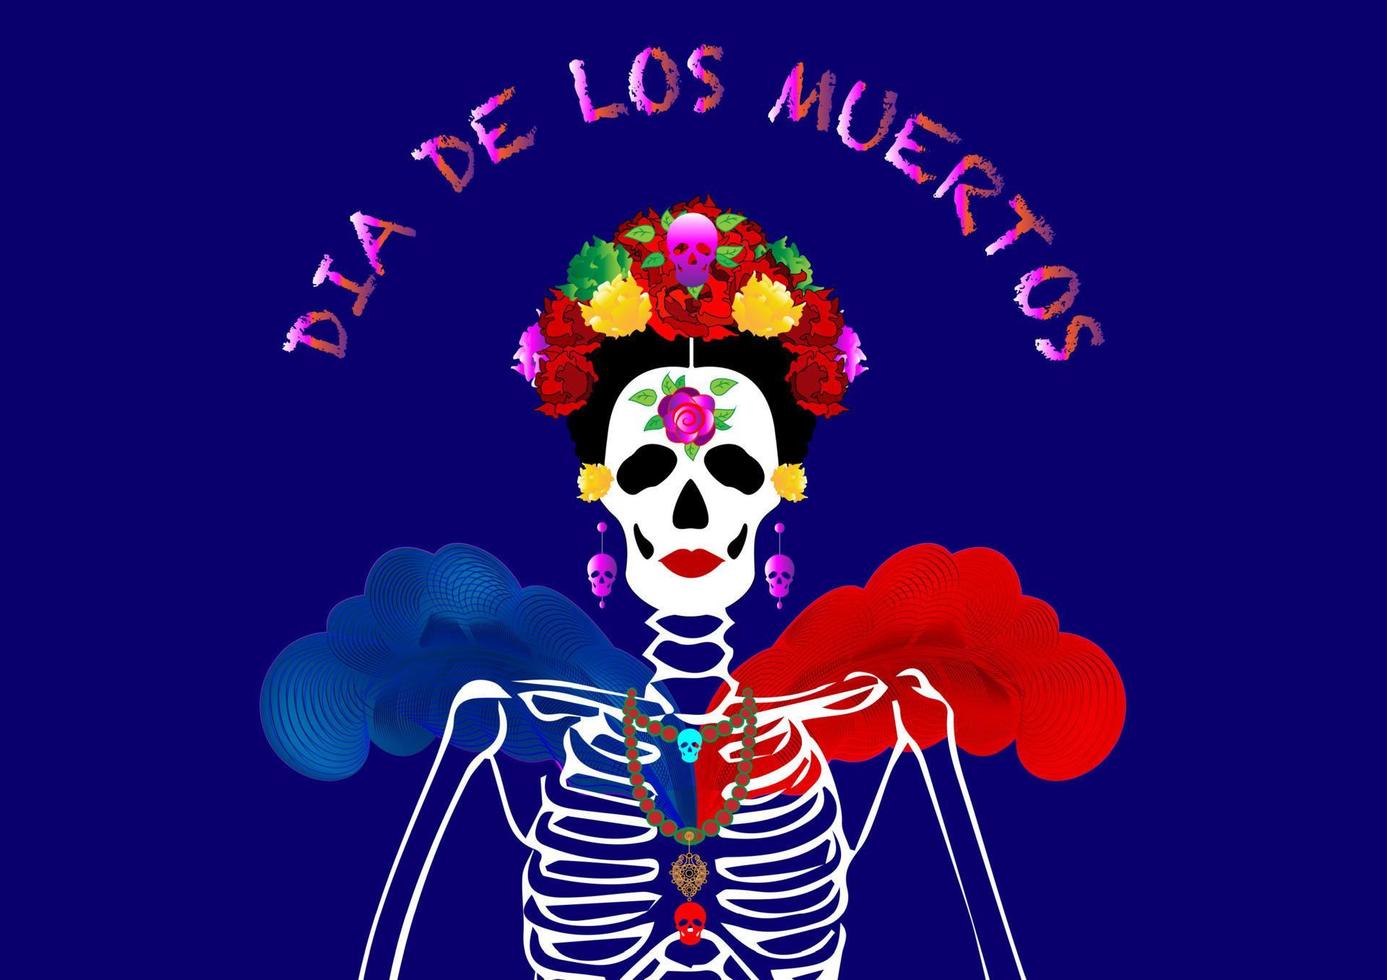 Dia de los muertos, Day of the dead Mexican holiday festival. Woman skull with make up of Catrina with flowers crown. Poster, banner and card with sugar skull vector